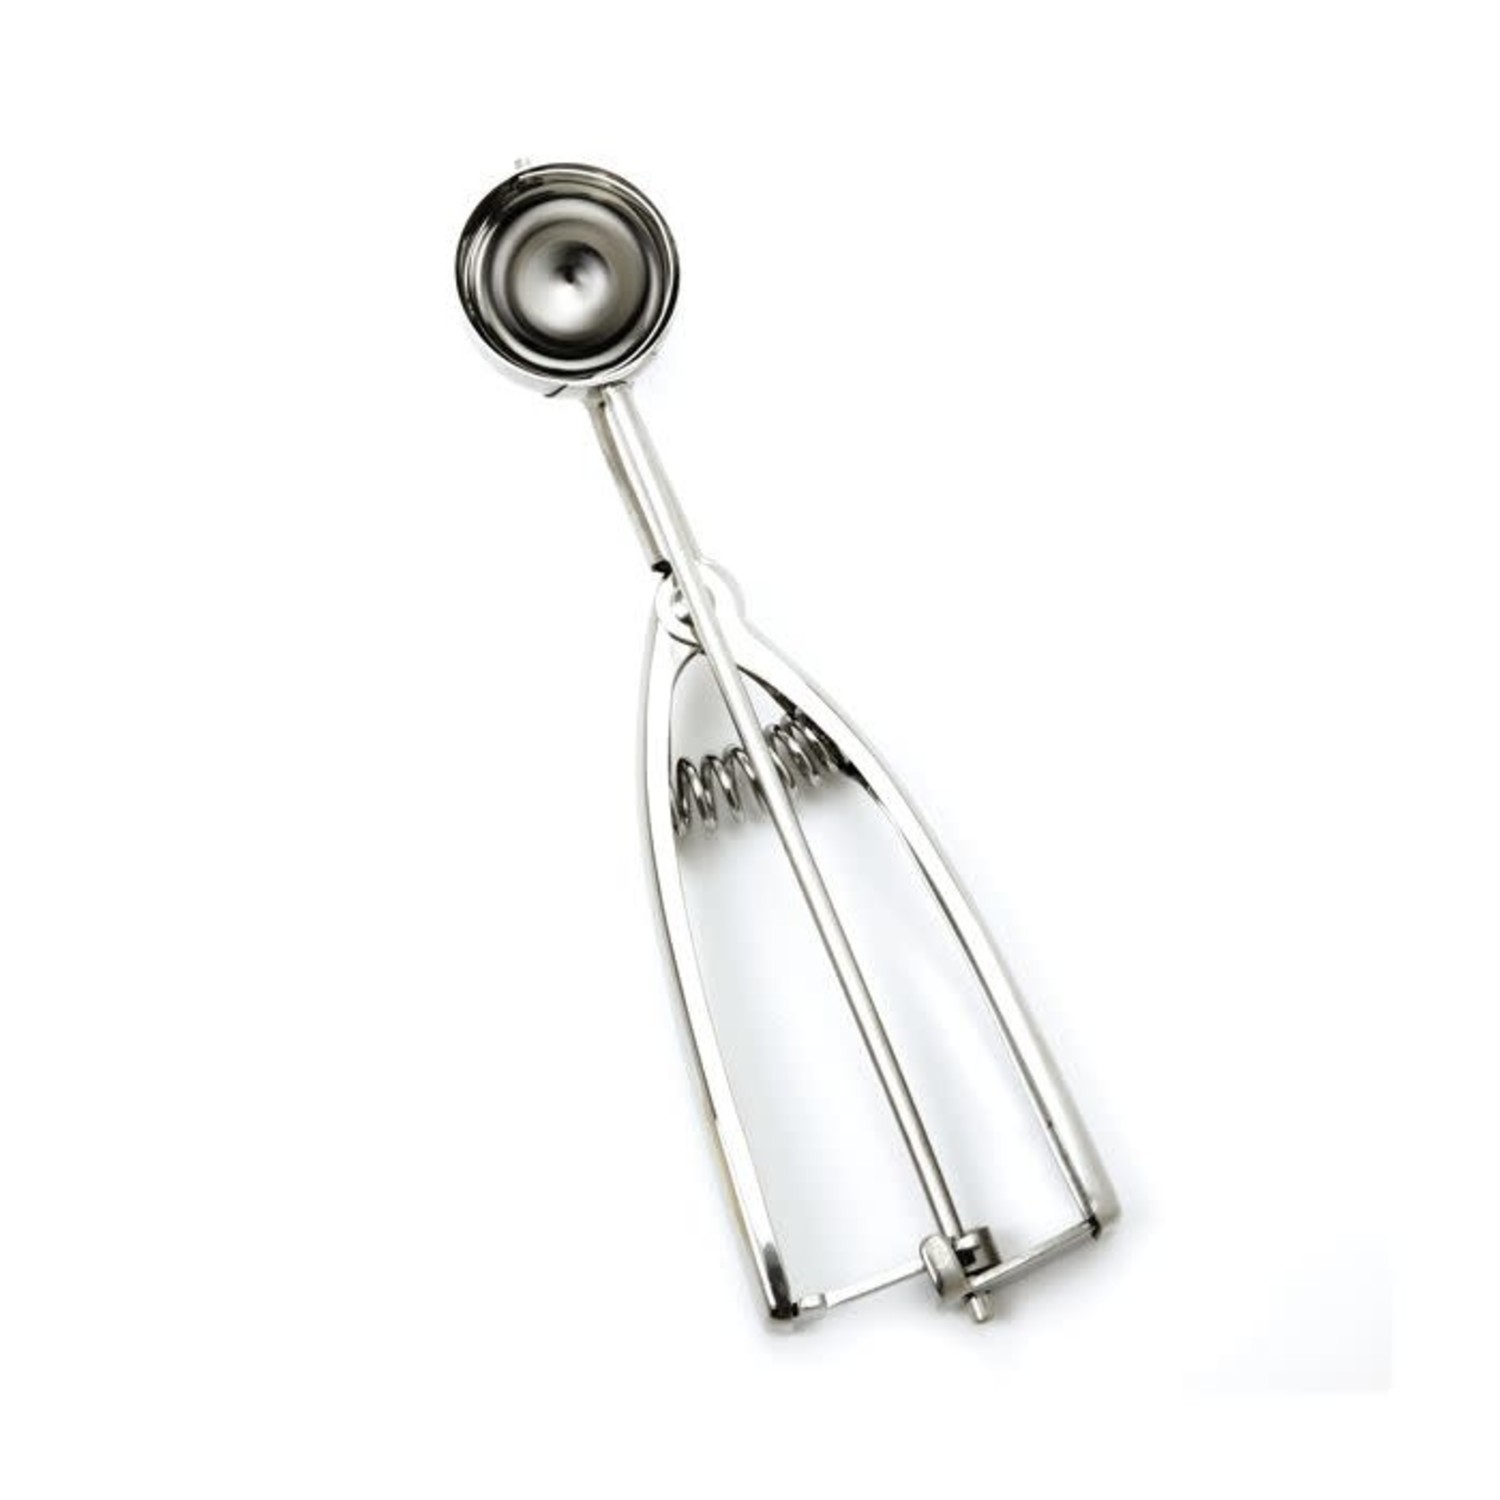 Good Cook Touch Stainless Steel Cookie Scoop